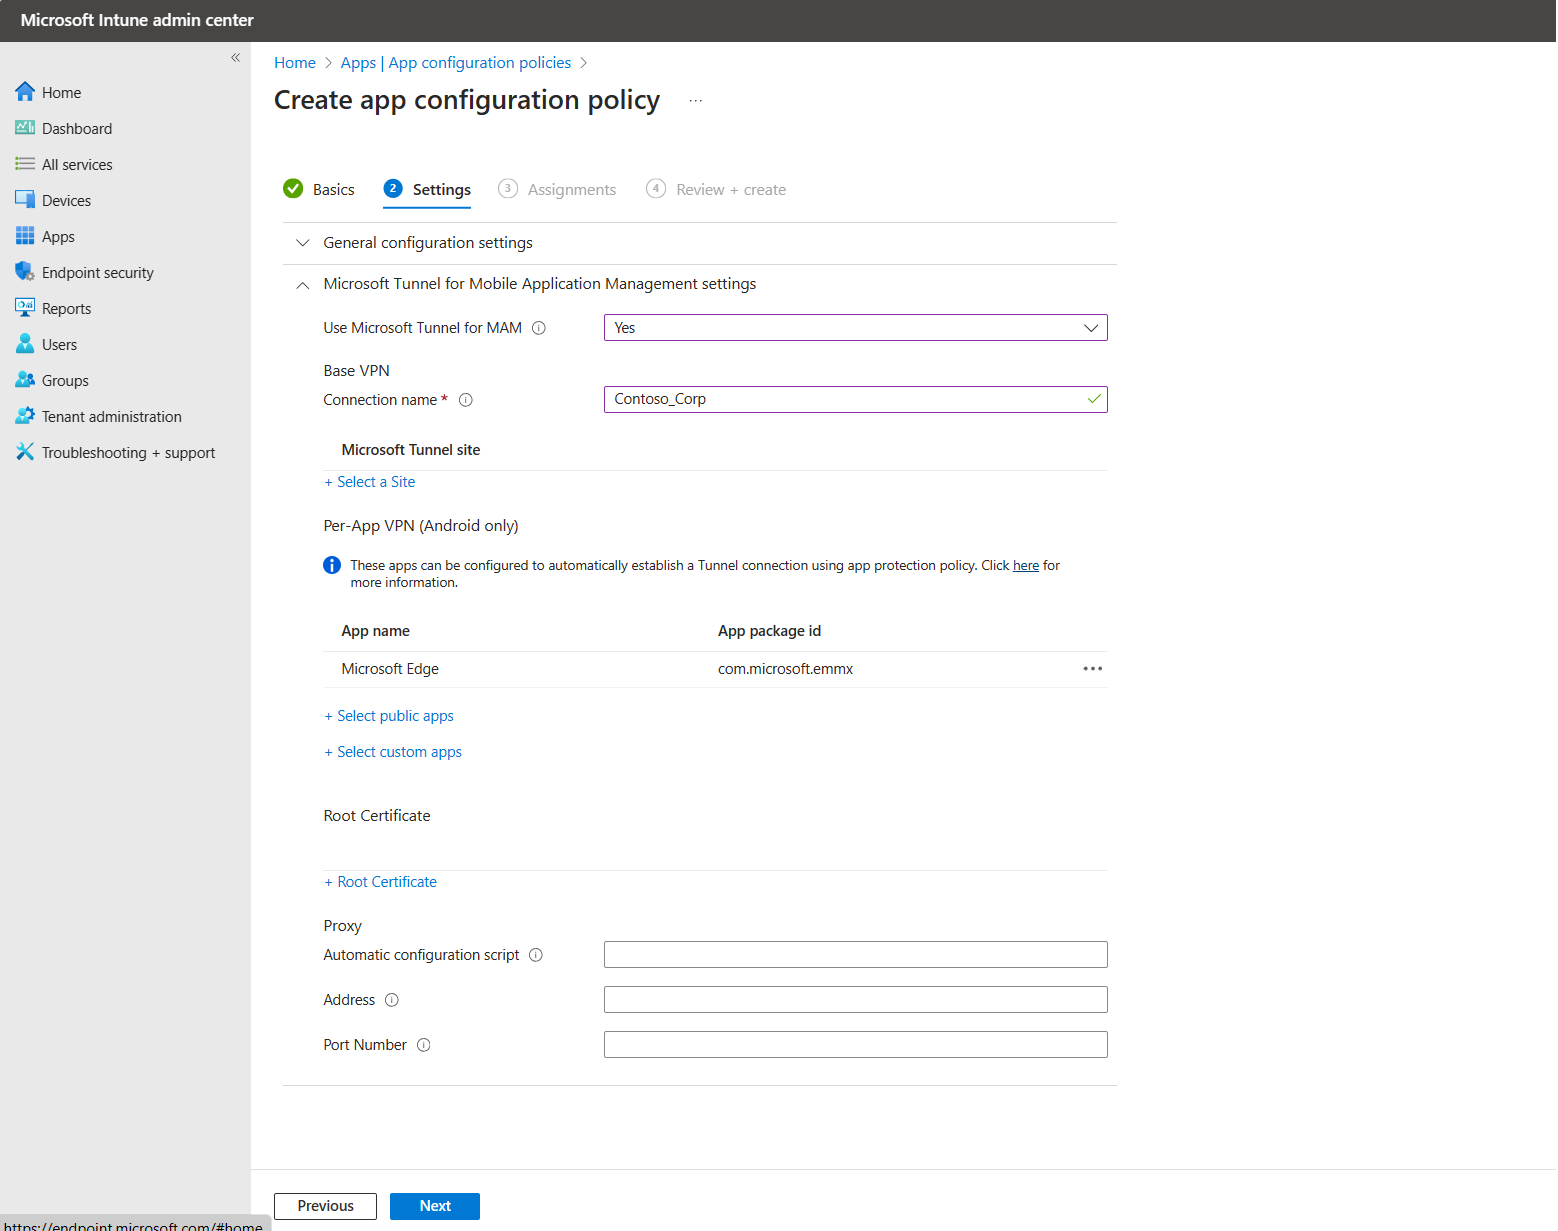 Screen shot of the per-app configuration configuration with Microsoft Edge added.